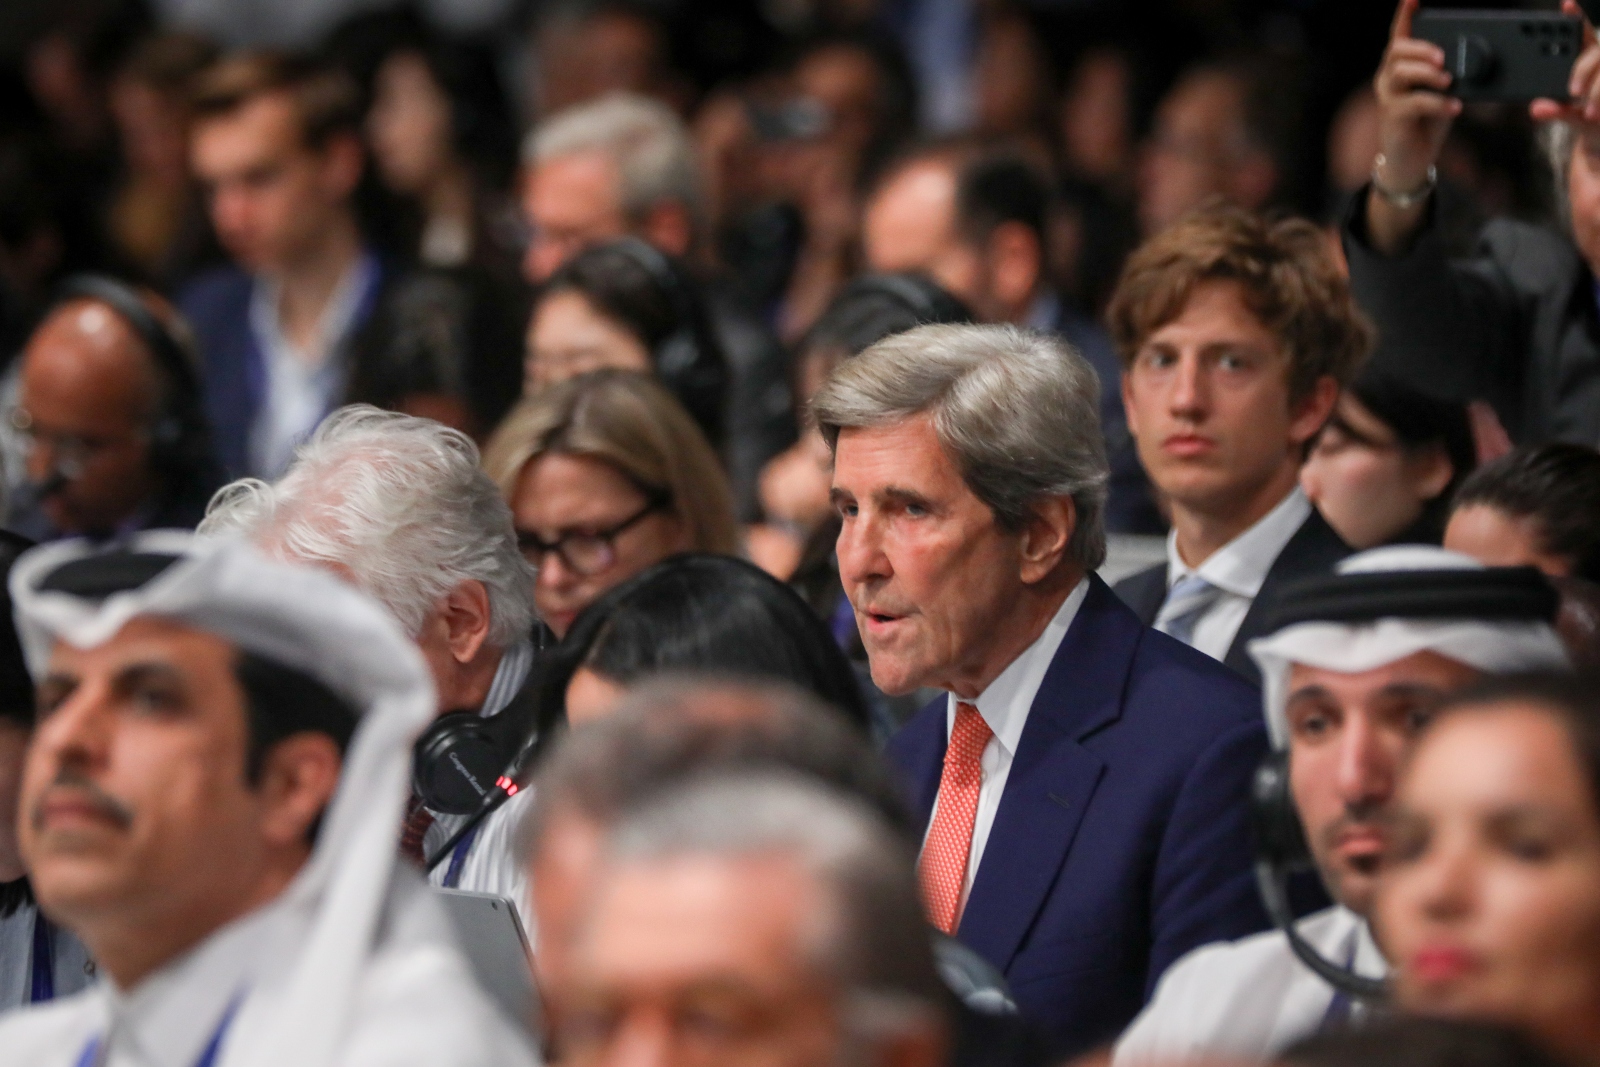 John Kerry, the United States climate envoy, attends day thirteen of COP28. Kerry pushed back against attempts to weaken language on fossil fuels.